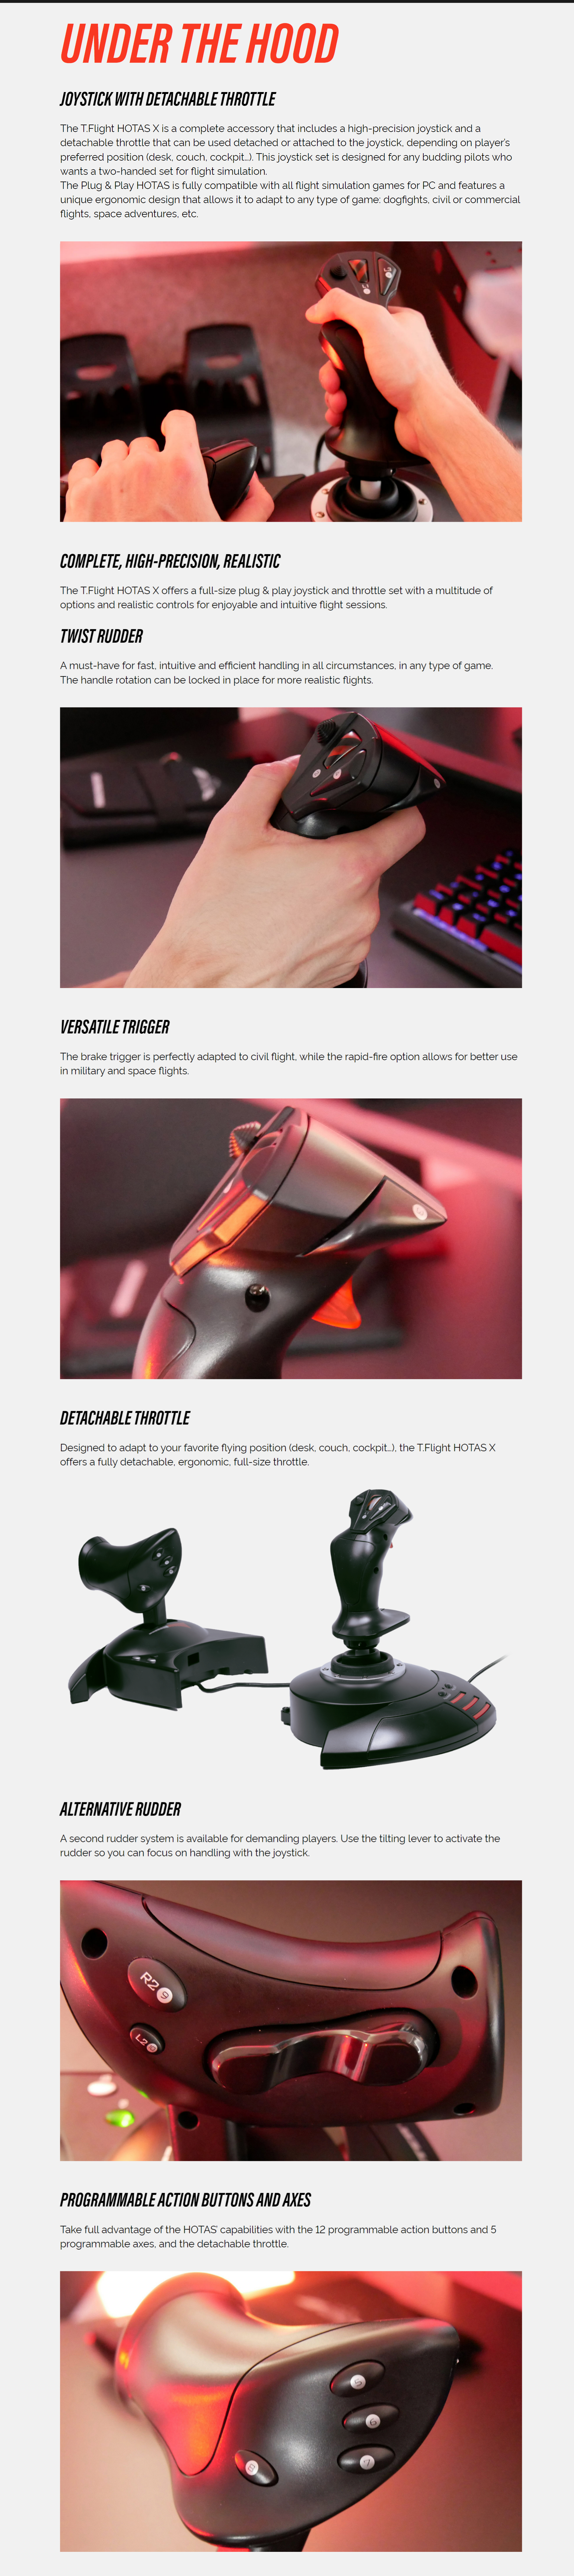 A large marketing image providing additional information about the product Thrustmaster T.Flight HOTAS X - Joystick & Throttle for PC & PS3 - Additional alt info not provided